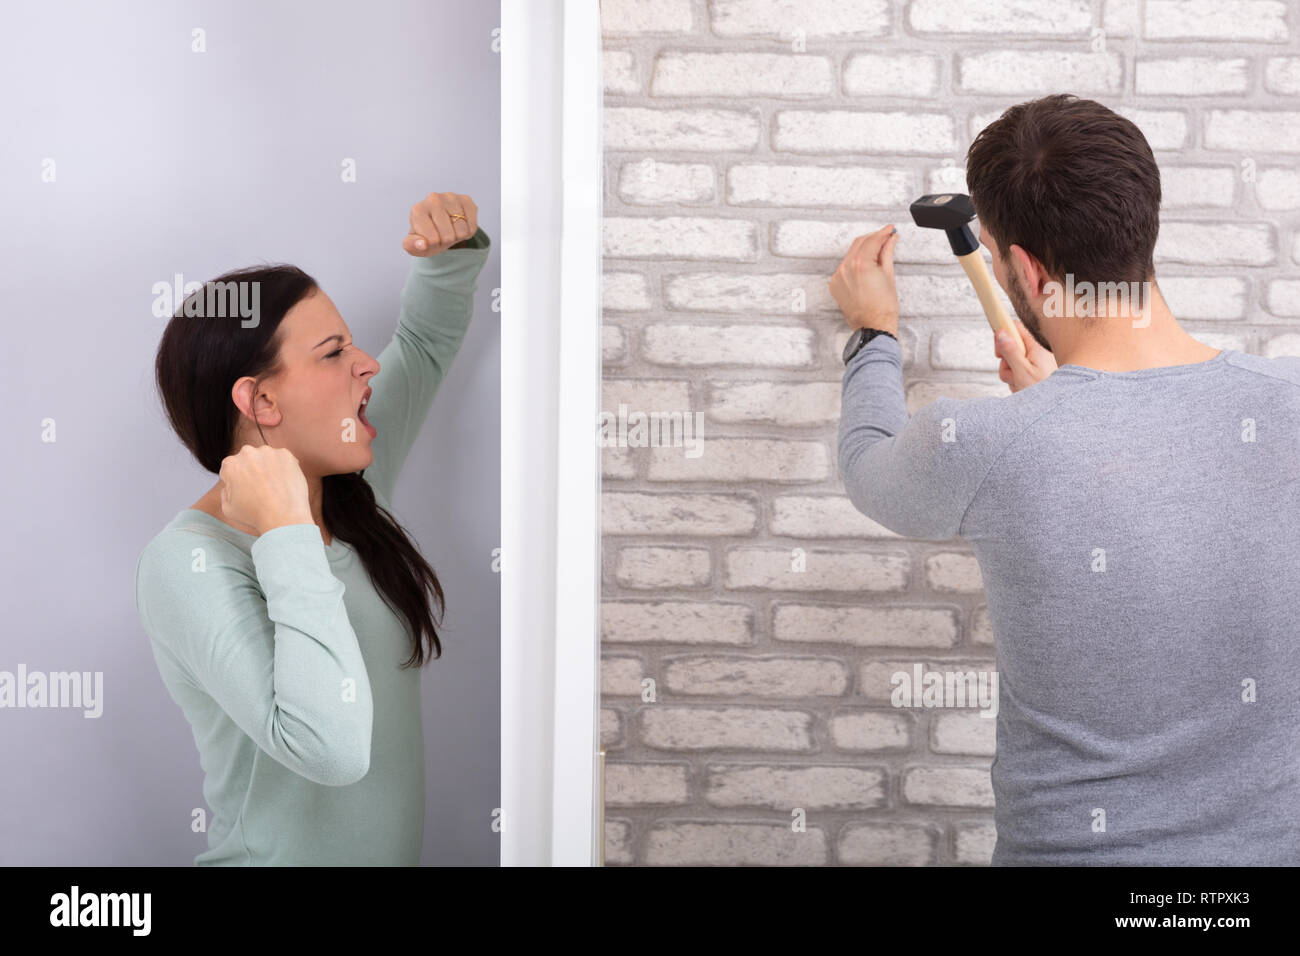 An Angry Woman Shouting Behind The Wall With The Neighbor Man Hitting On Brick Wall Stock Photo